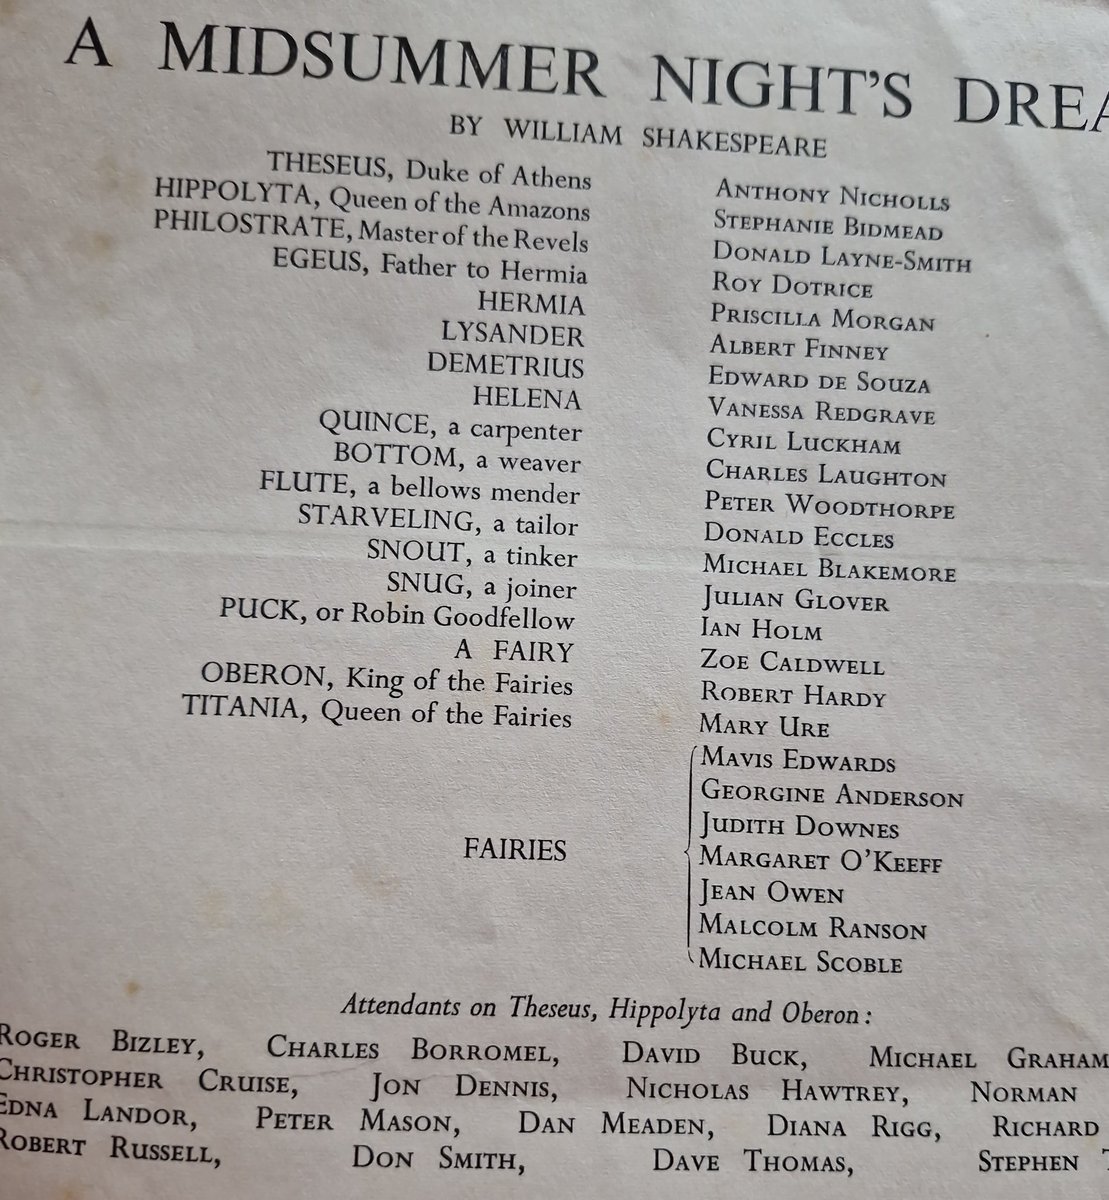 I forgot I bought this last time I was back home in Stratford Upon Avon last year, a programme for a first performance of A Midsummer Night's Dream from 1959. Plenty of famous names such as Ian Holm, Vanessa Redgrave and Diana Rigg. #Shakespeare #stratforduponavon